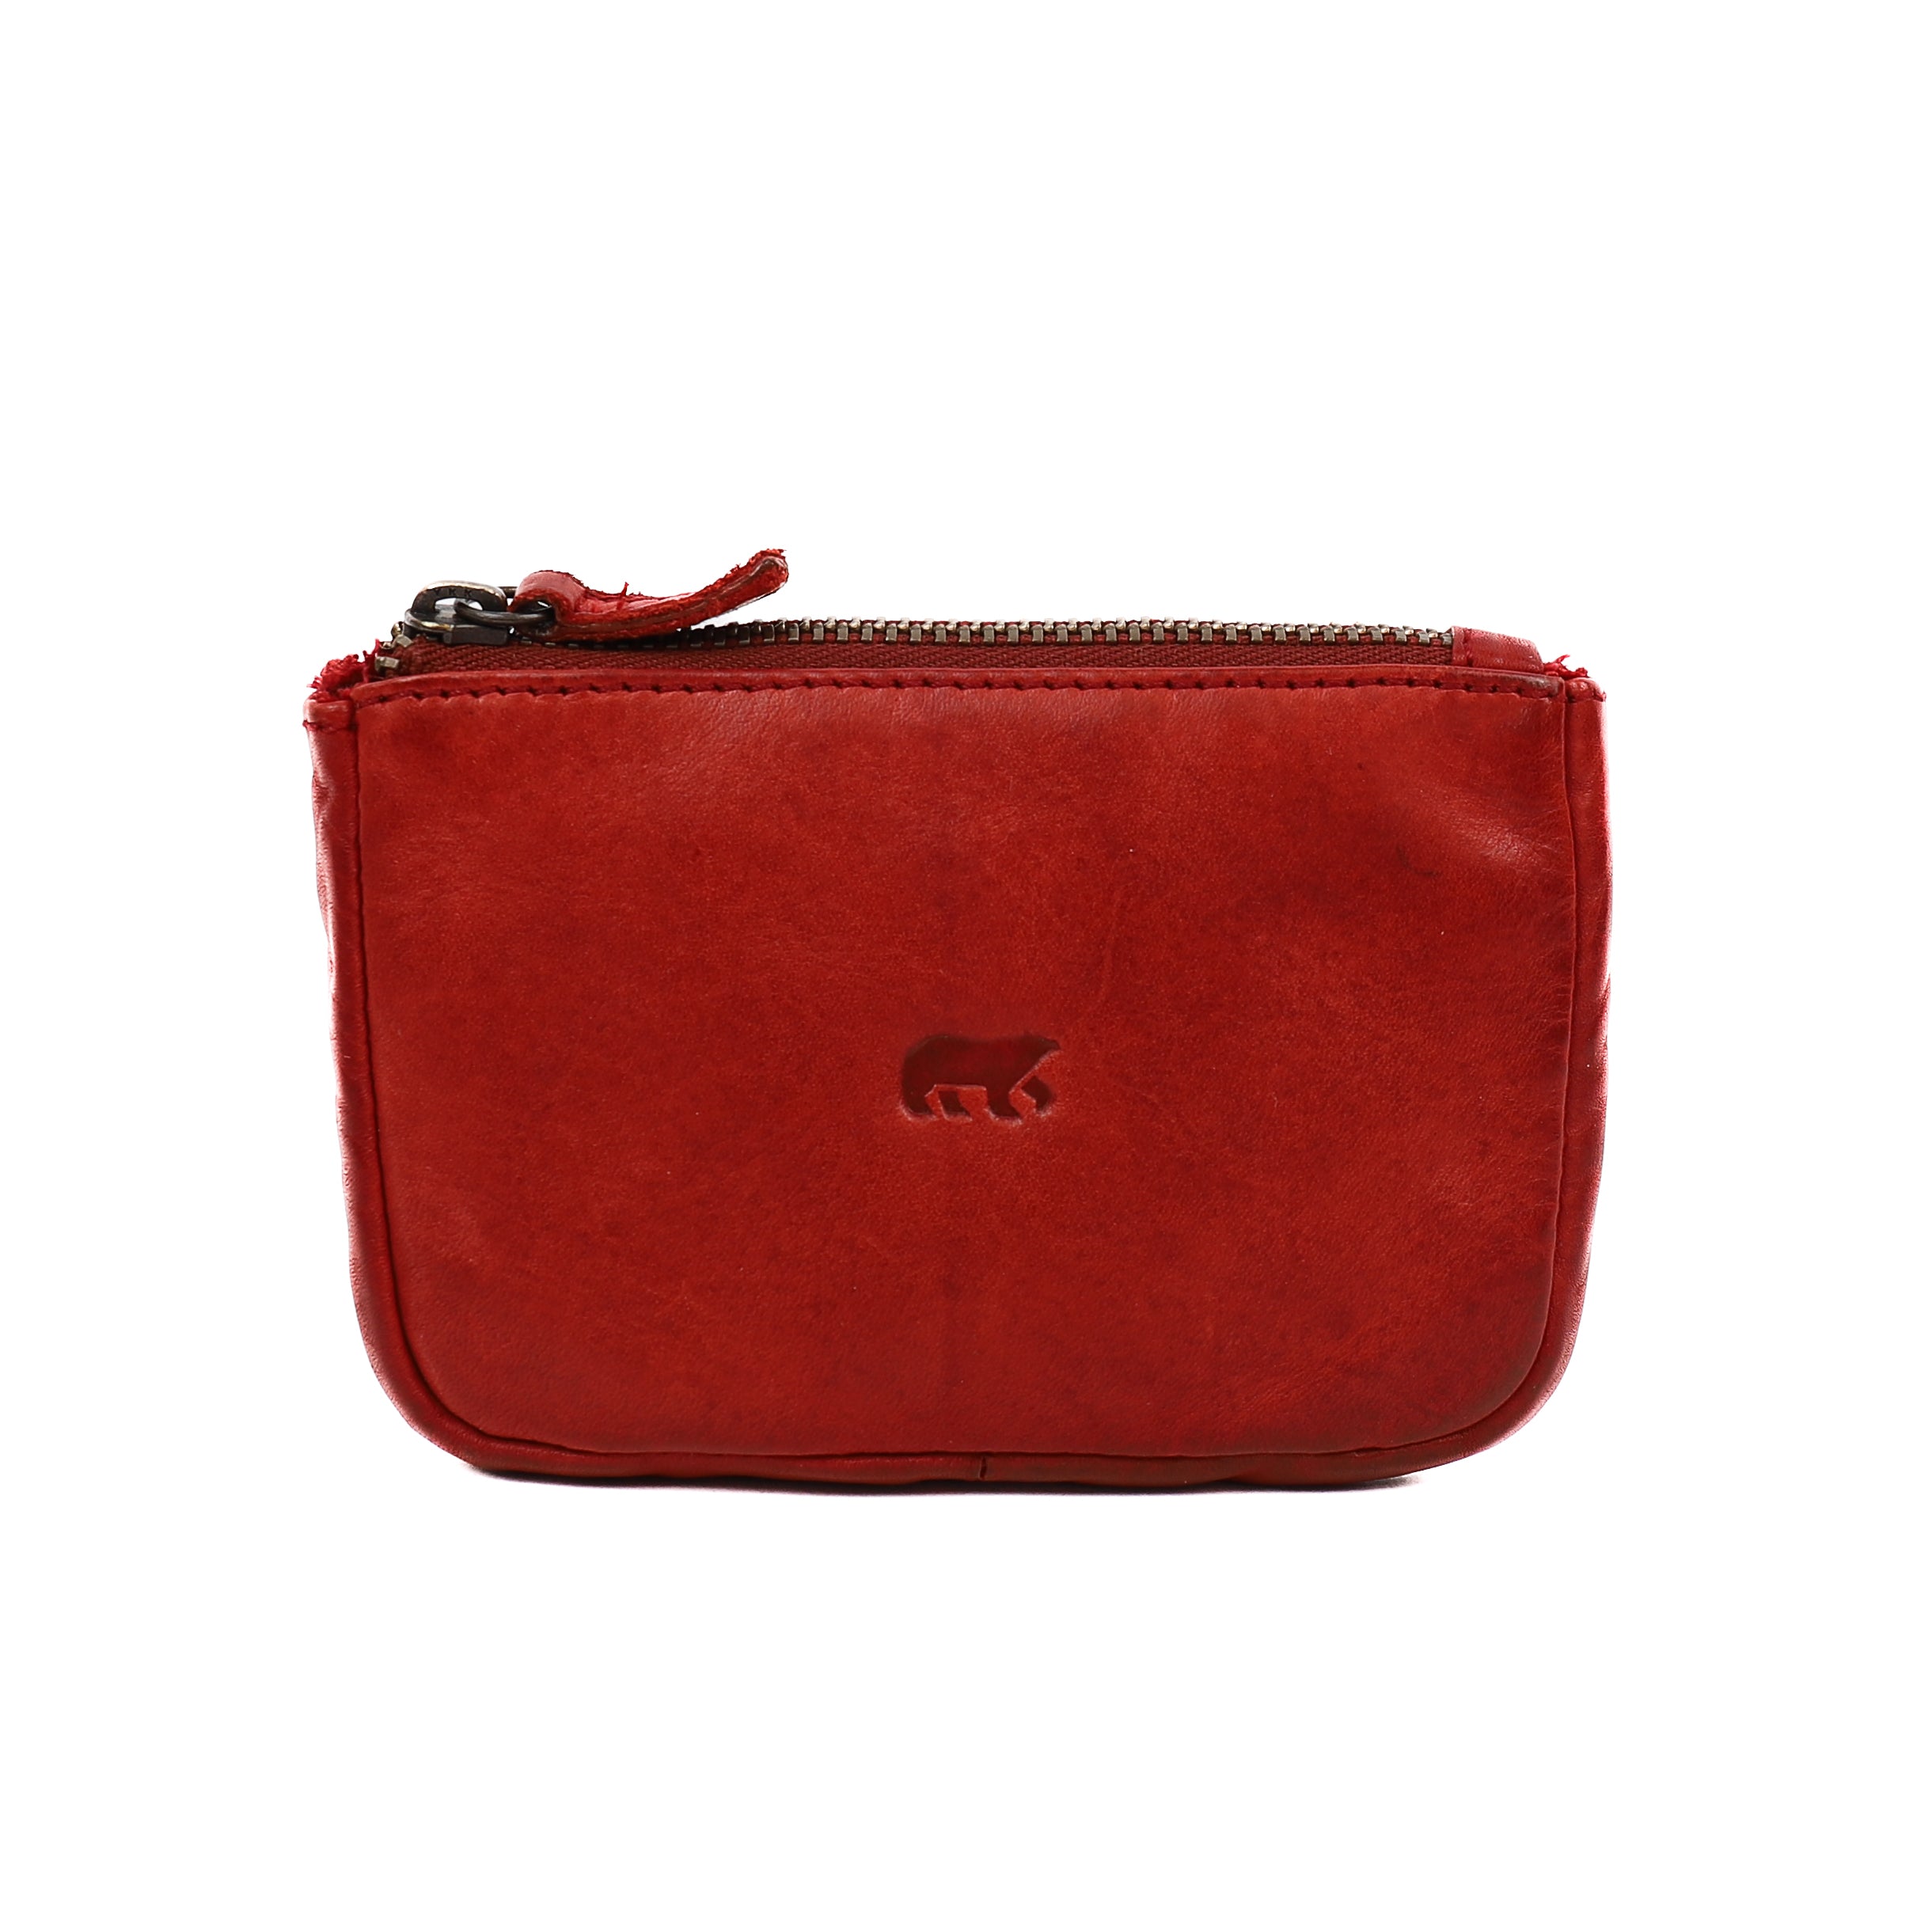 Key pouch 'Timo' red